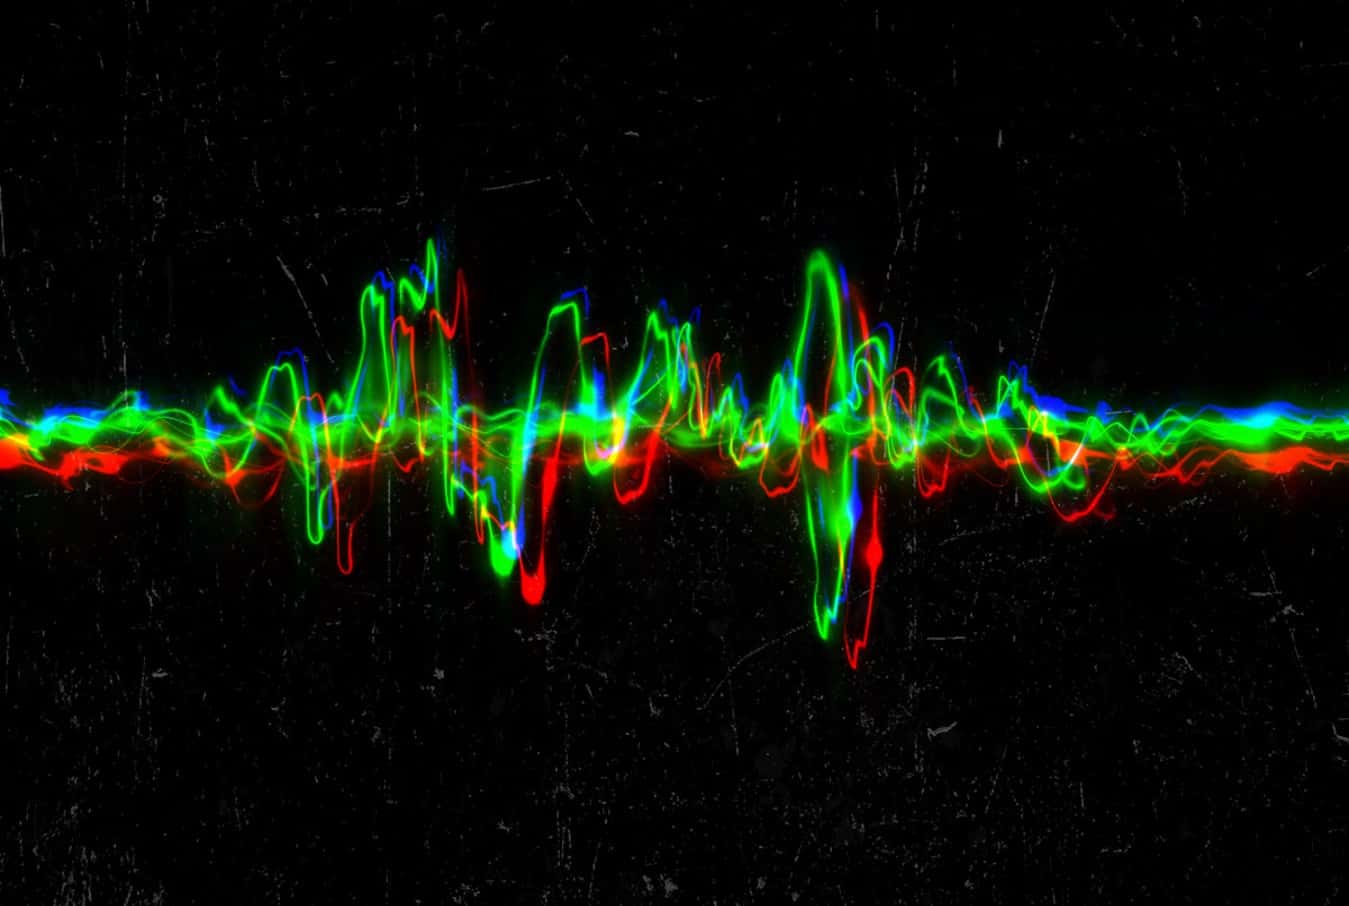 Voice assistant devices can be manipulated using ultrasonic waves